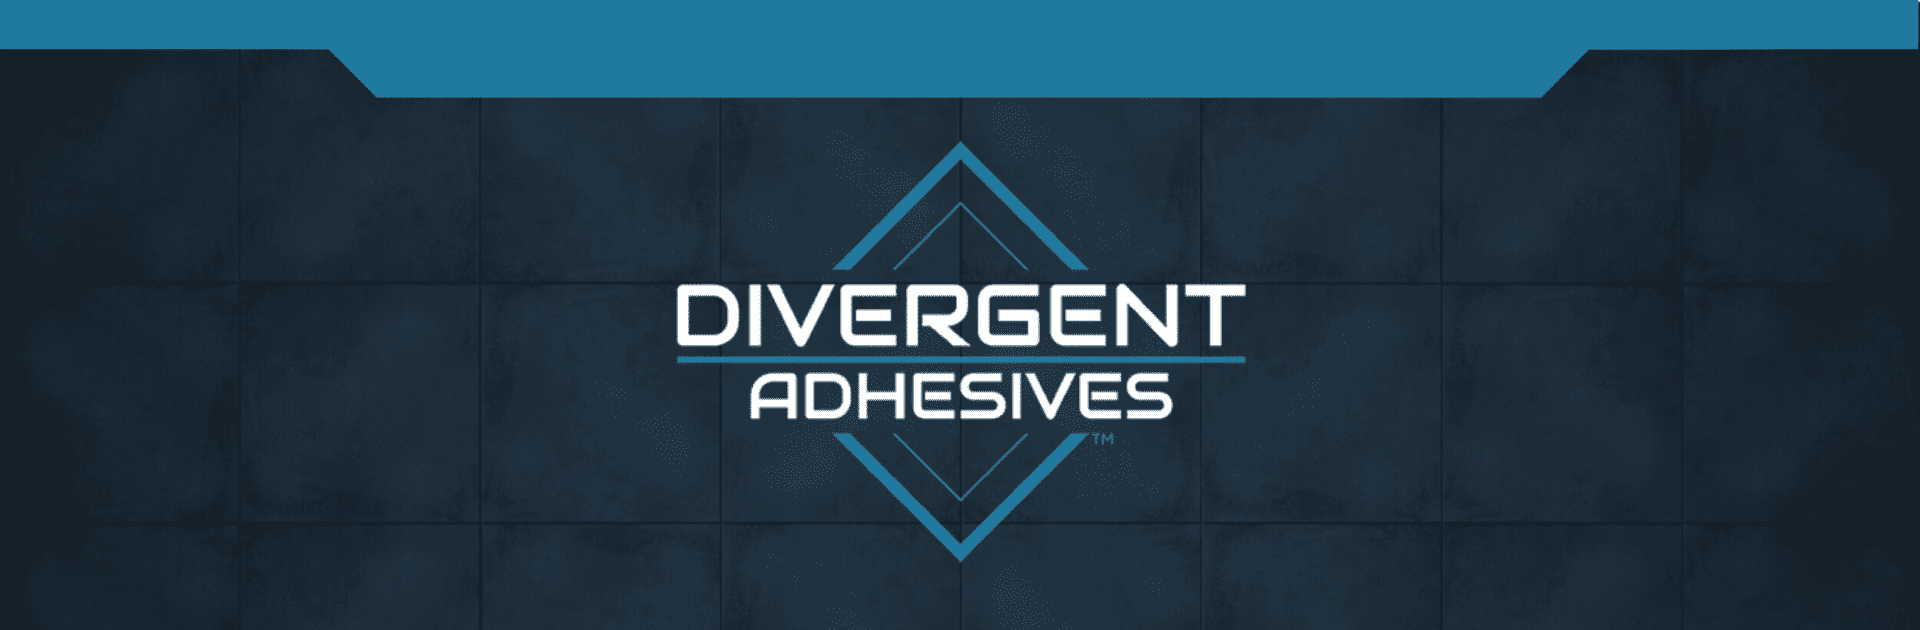 A blue and white logo for divergent adhesives